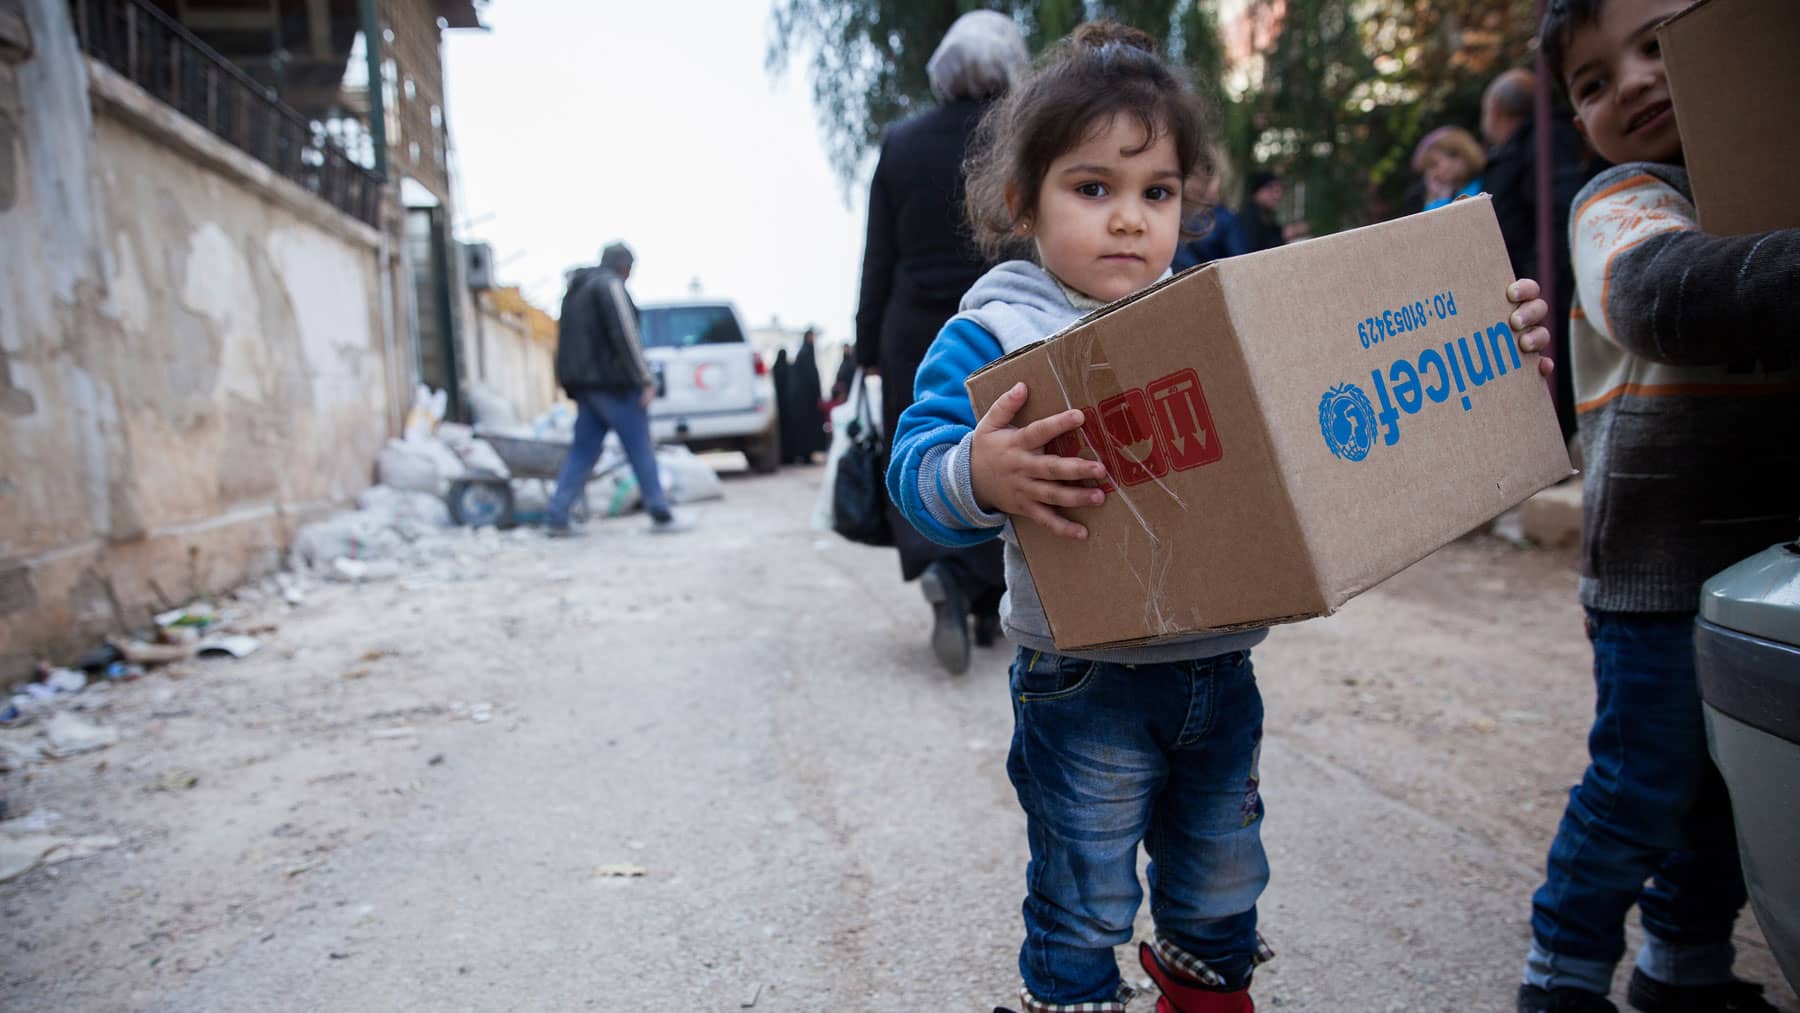  A young girl in Al-Waer, Homs, Syria, carries a box of winter clothes provided by UNICEF.